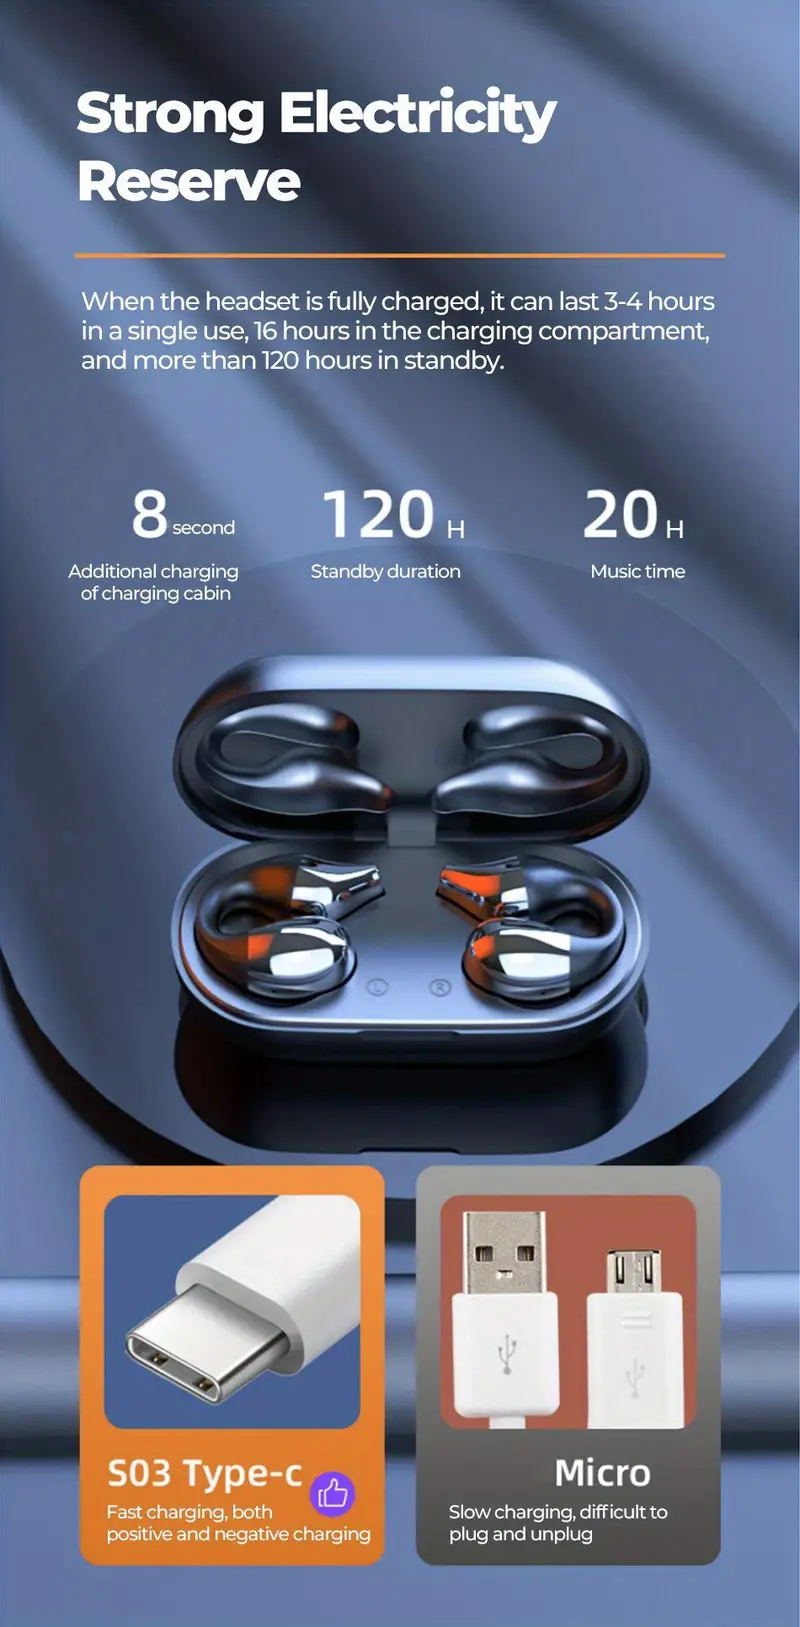 wireless earphones mini portable headphones with bt perfect for cycling driving running great gift for birthdays easter boys and girlfriends details 4